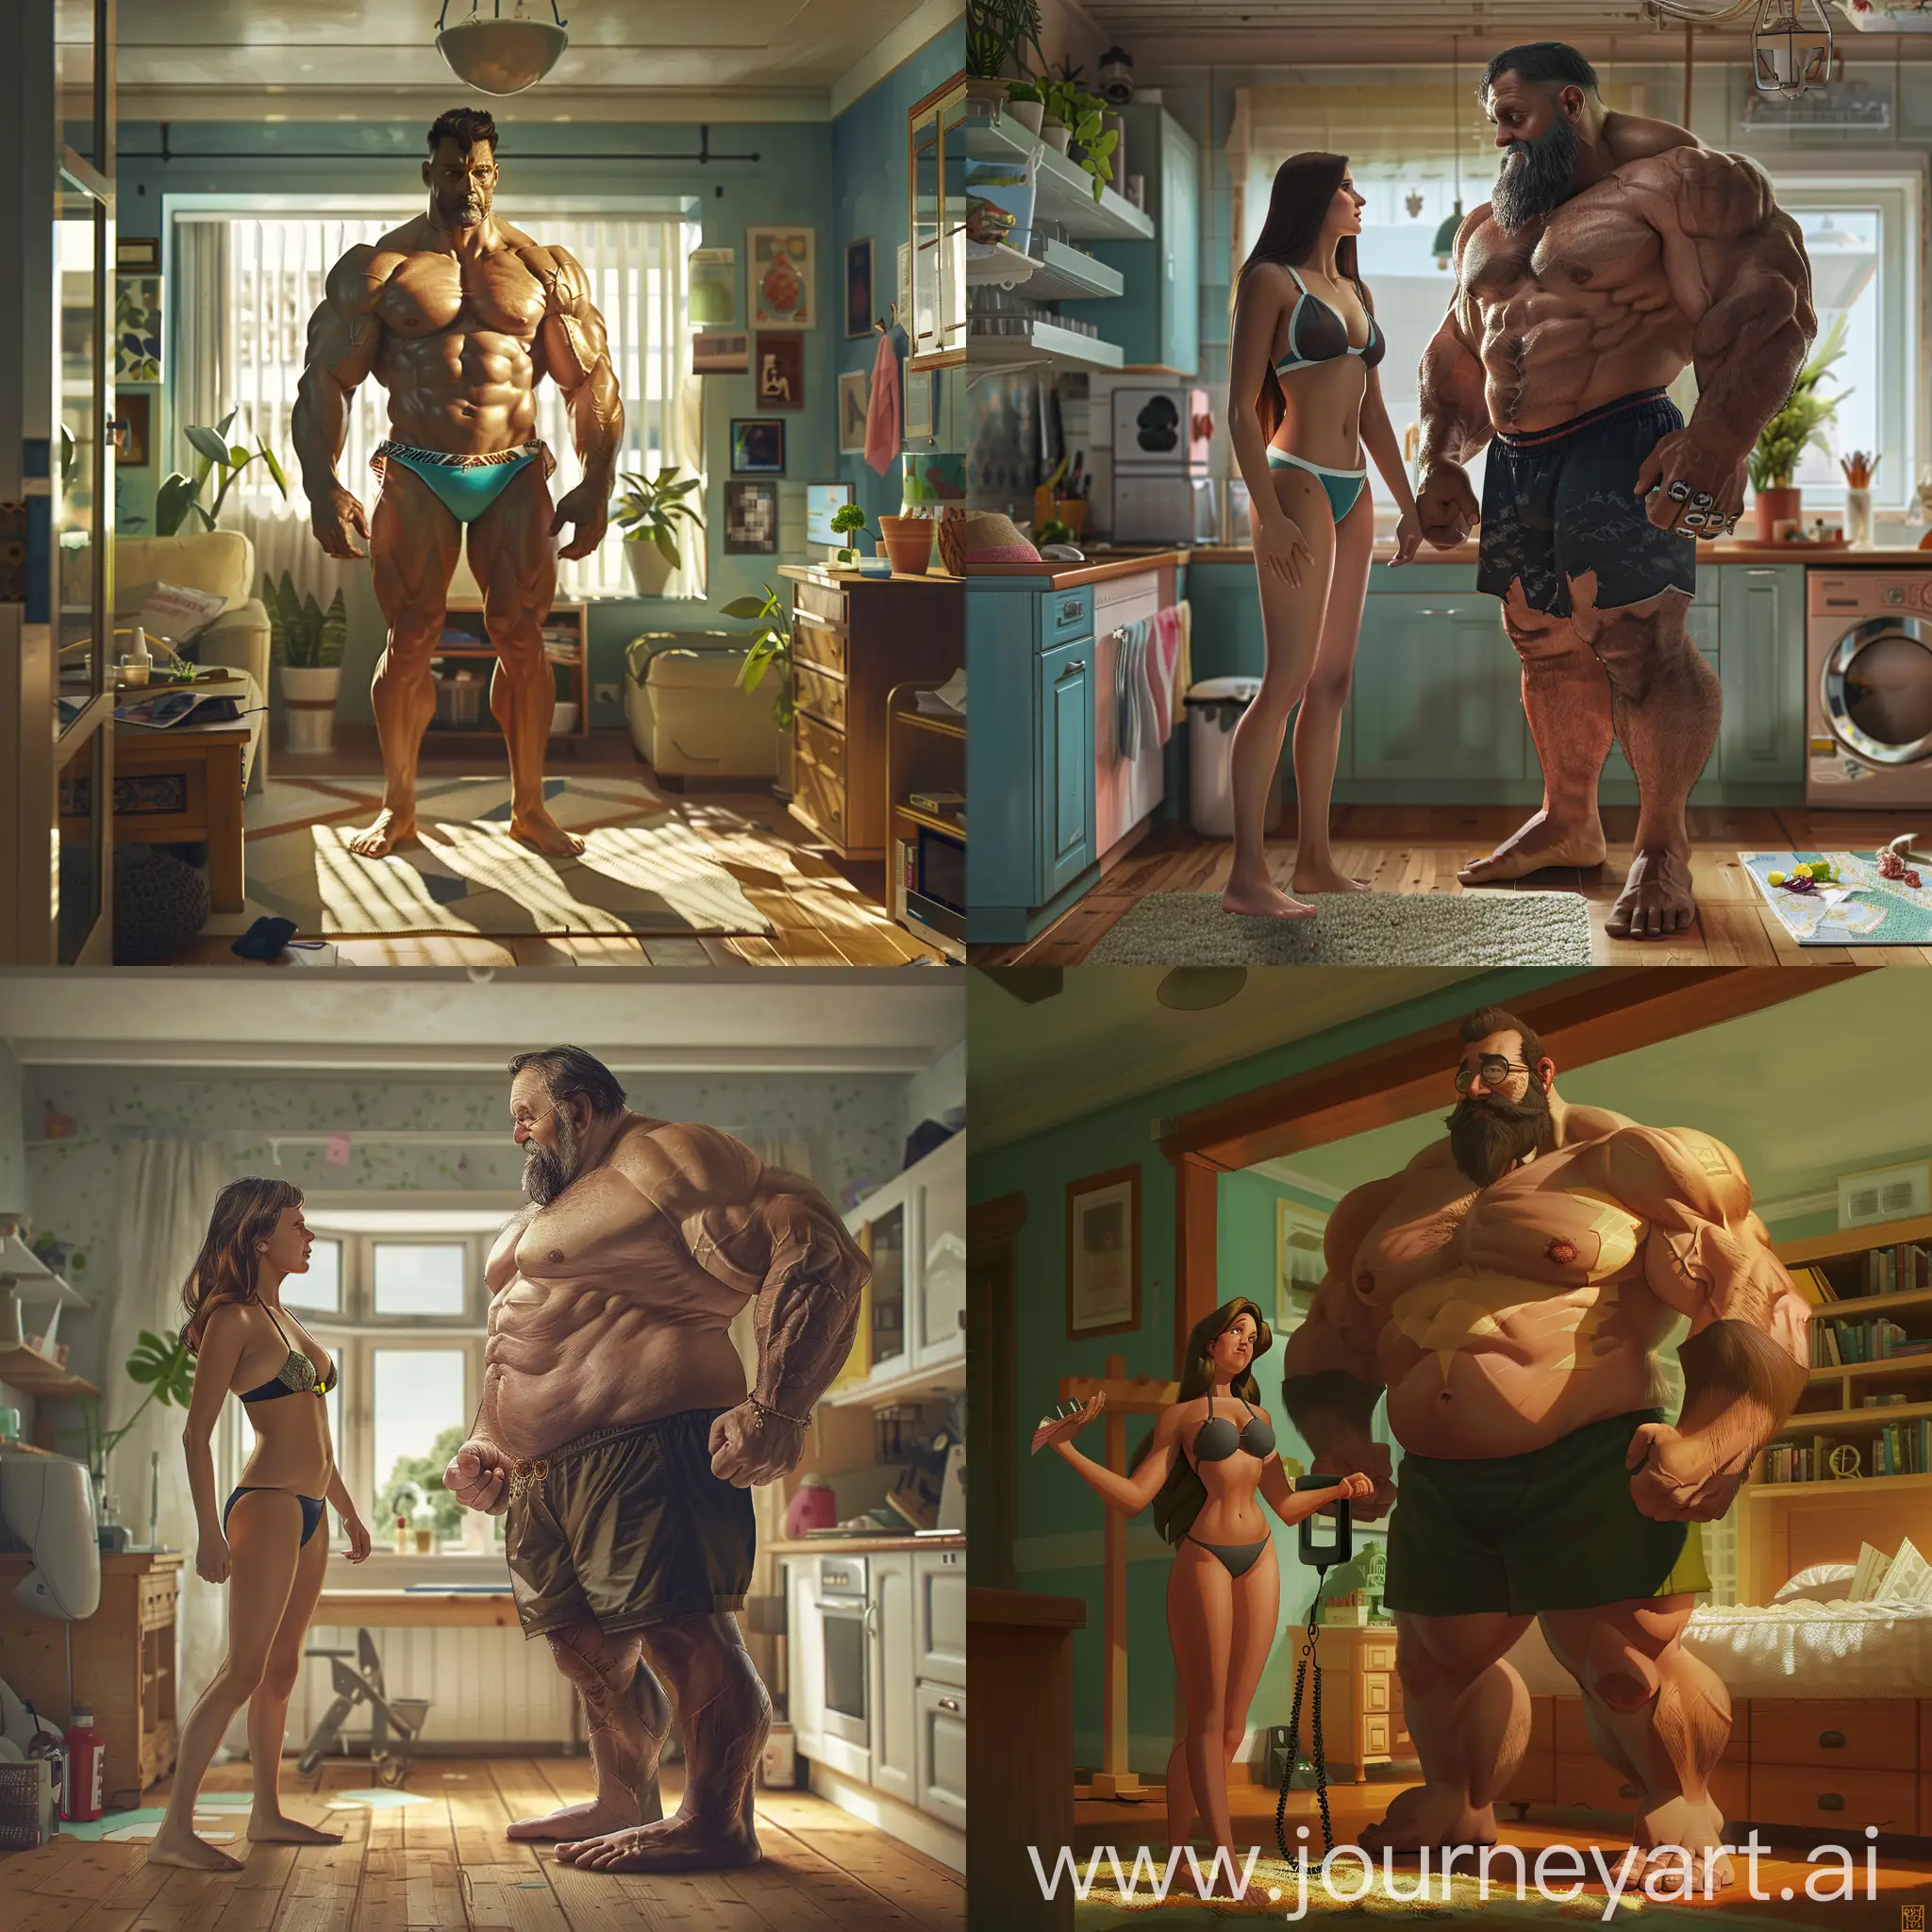 Explore the concept of strength and vulnerability through an artist's interpretation of a muscle strong father wearing a bikini at home.